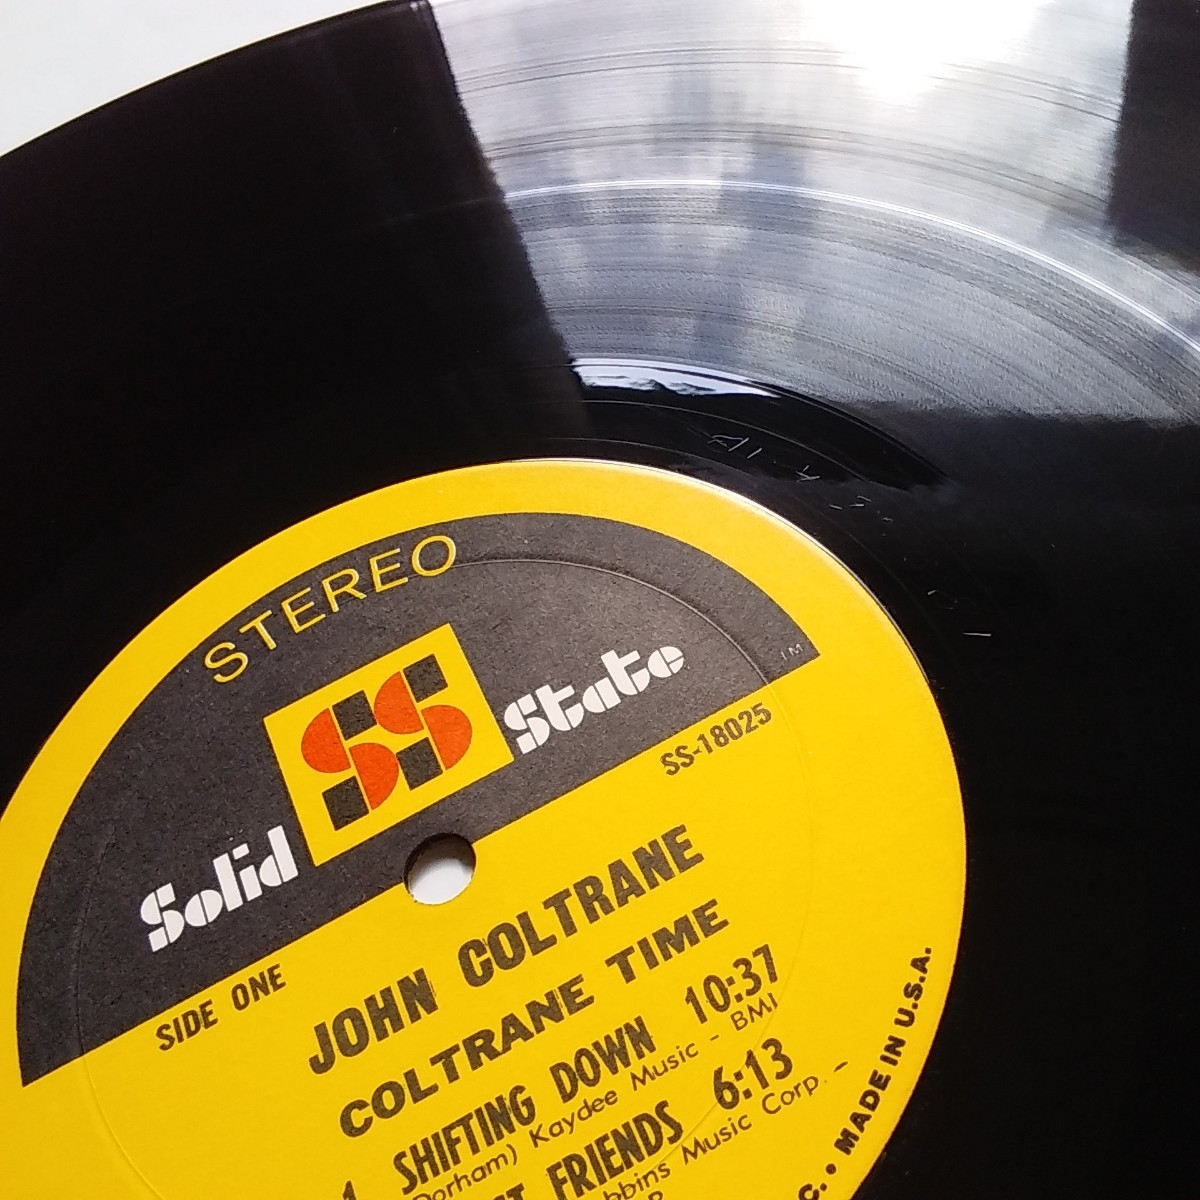 COLTRANE TIME Solid State STEREO SS 18025 THIS ALBUM HAS BEEN PREVIOUSLY ISSUED UNDER NUMBERS UAJ 14001 _SS18025AＩB?の刻印